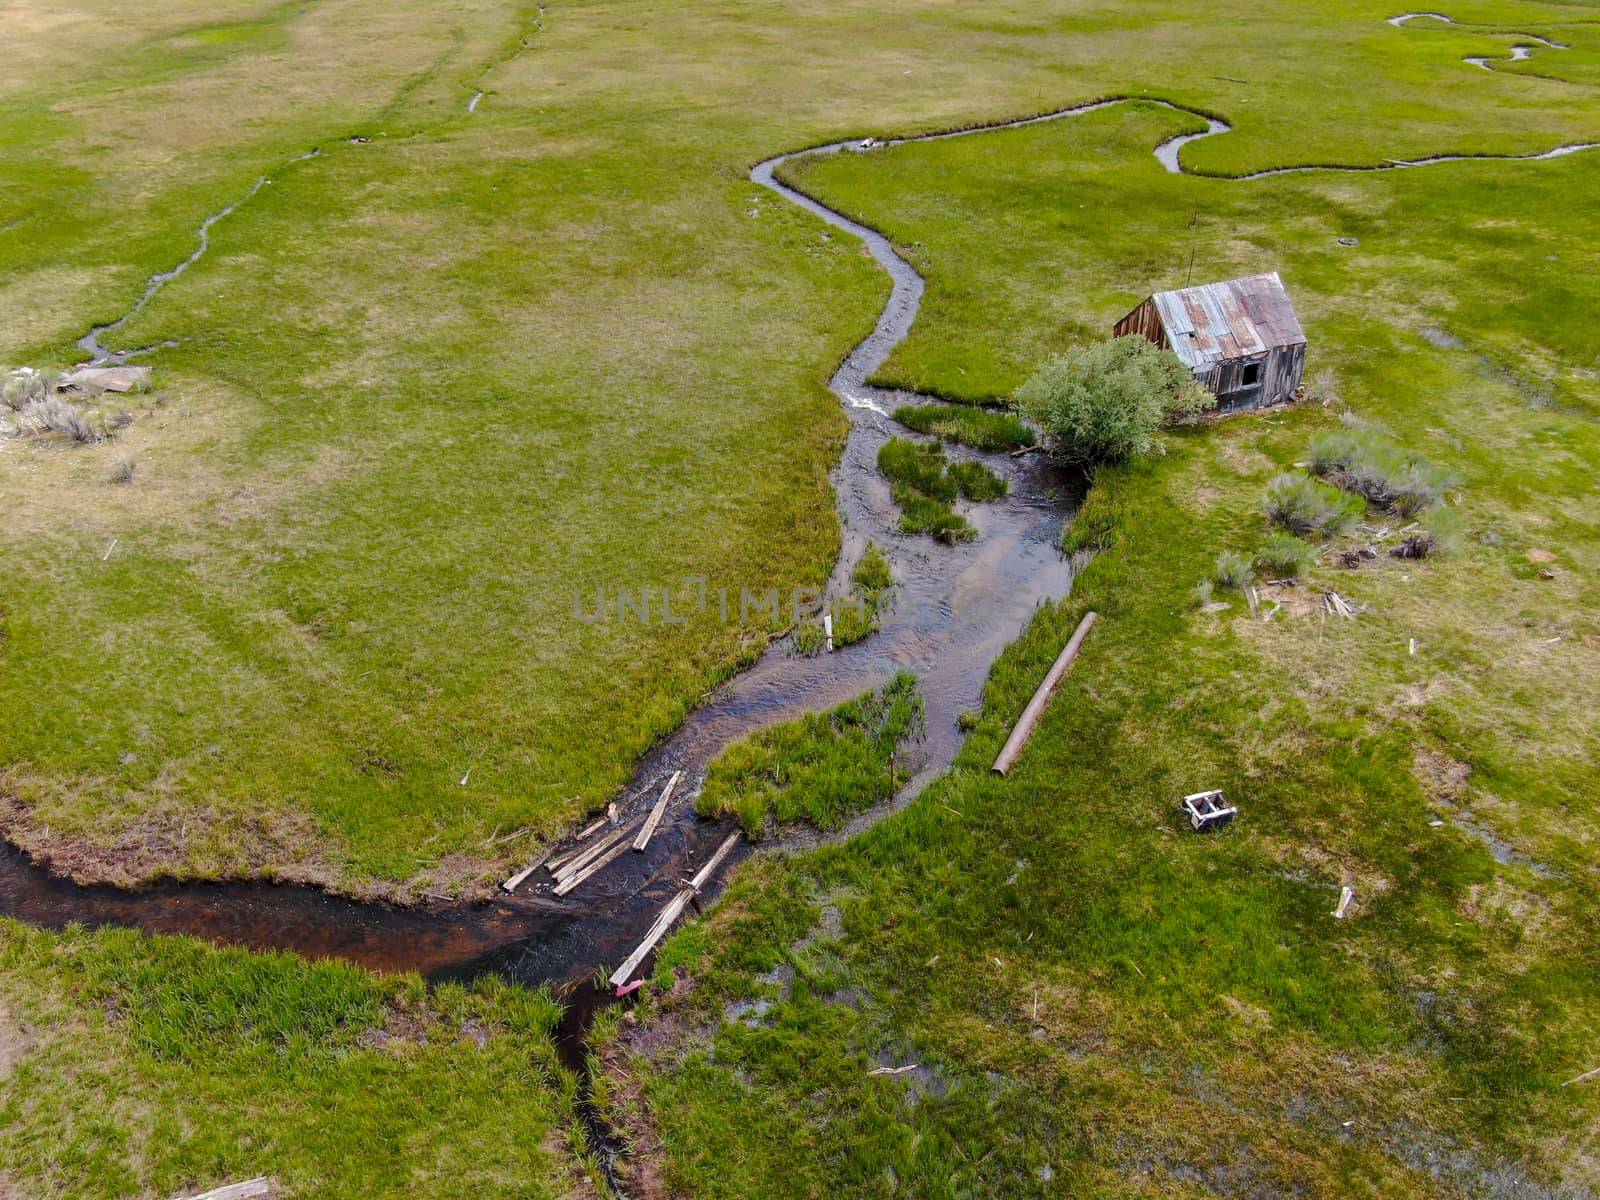 Aerial view of abandoned little wooden house barn next small river in the green valley, Aspen Spring by Bonandbon